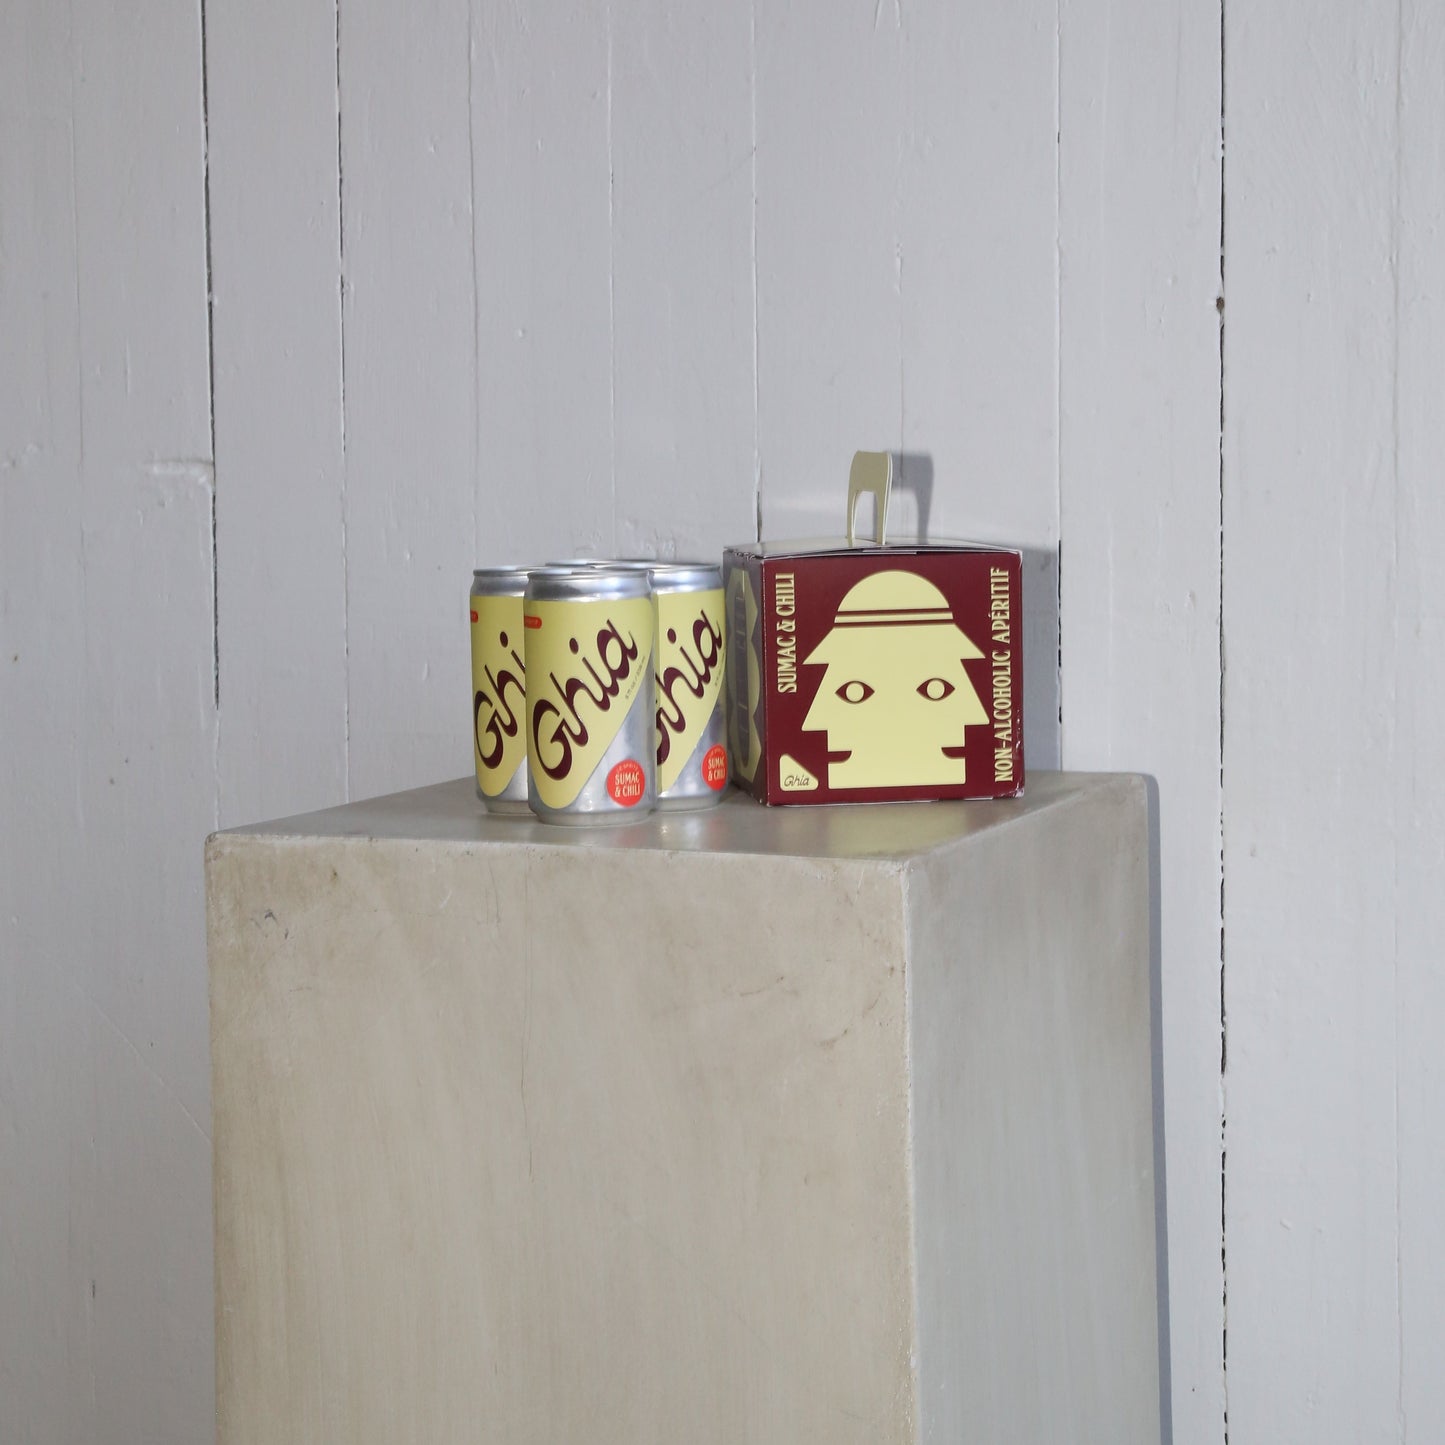 Ghia Sumac and Chili Soda case available at Rook & Rose.